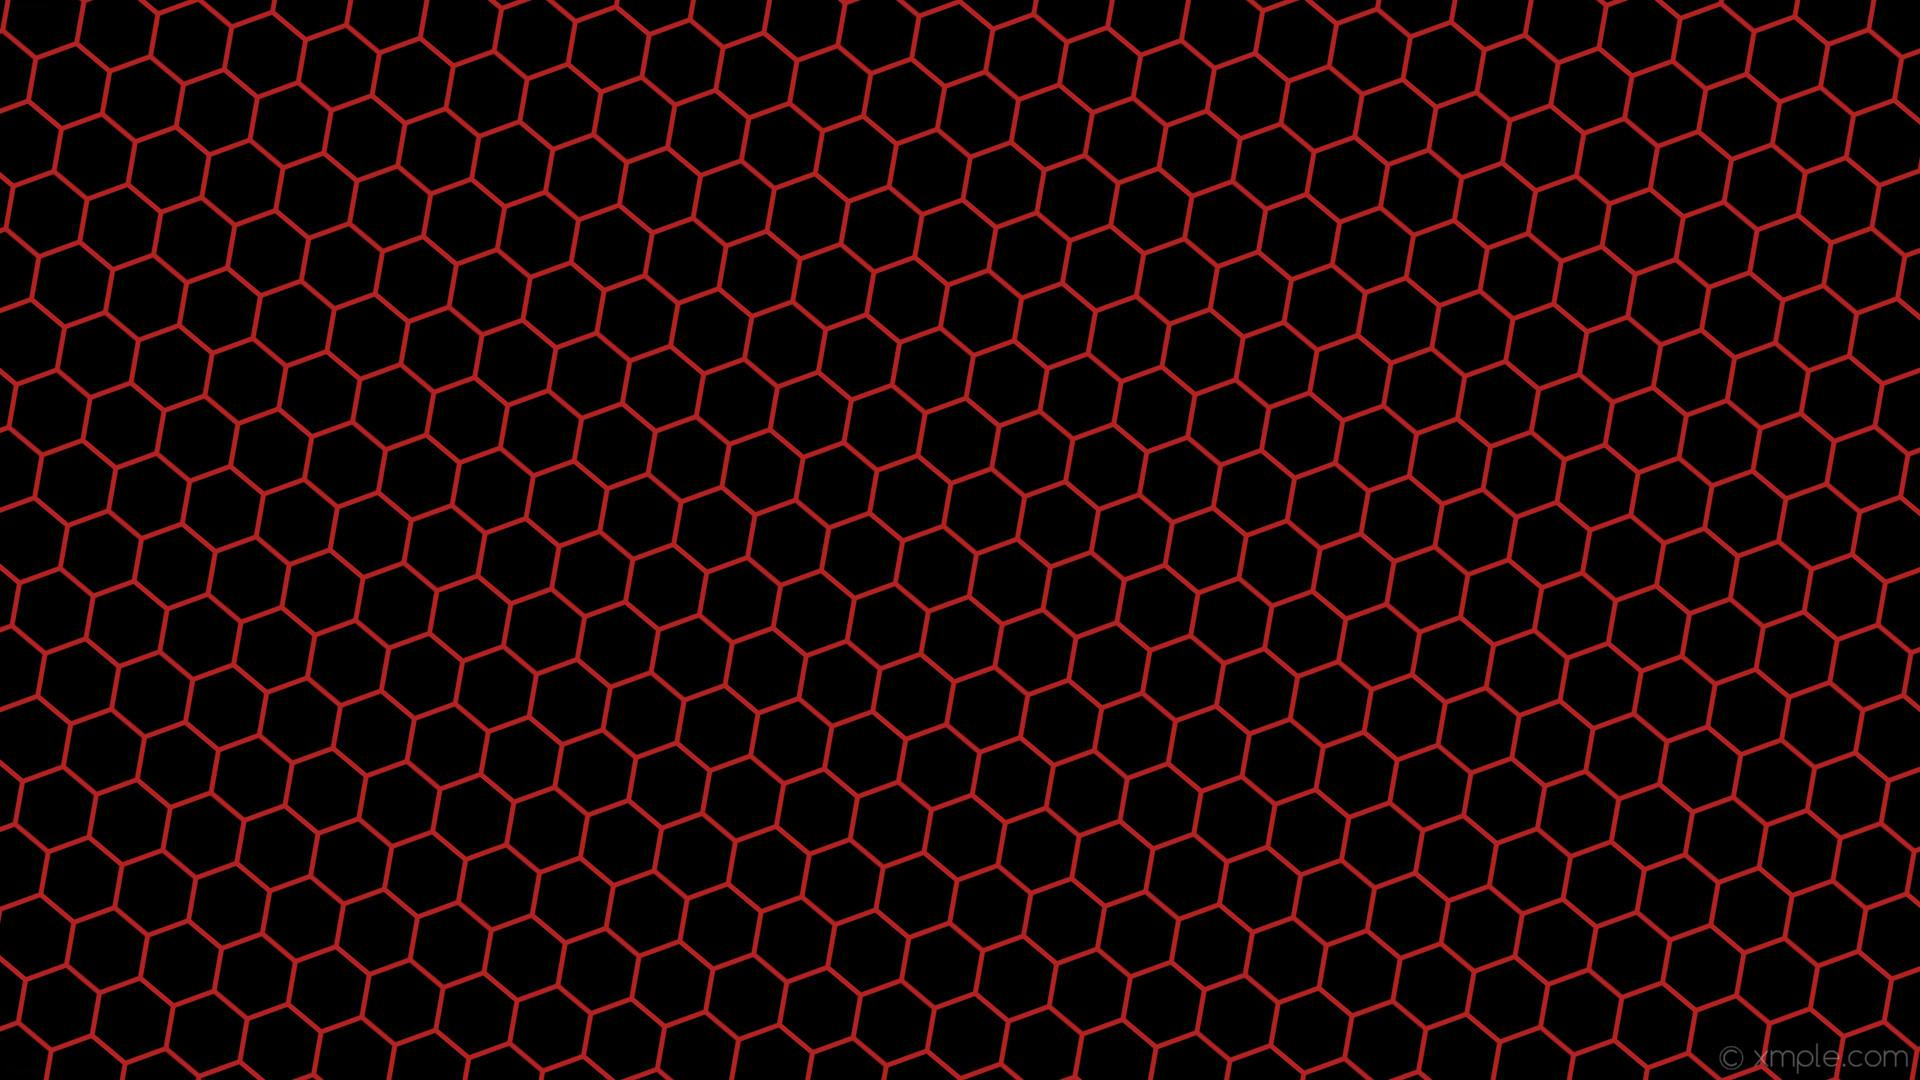 1920x1080 Red and Black Hexagon Wallpapers Top Free Red and Black Hexagon Backgrounds